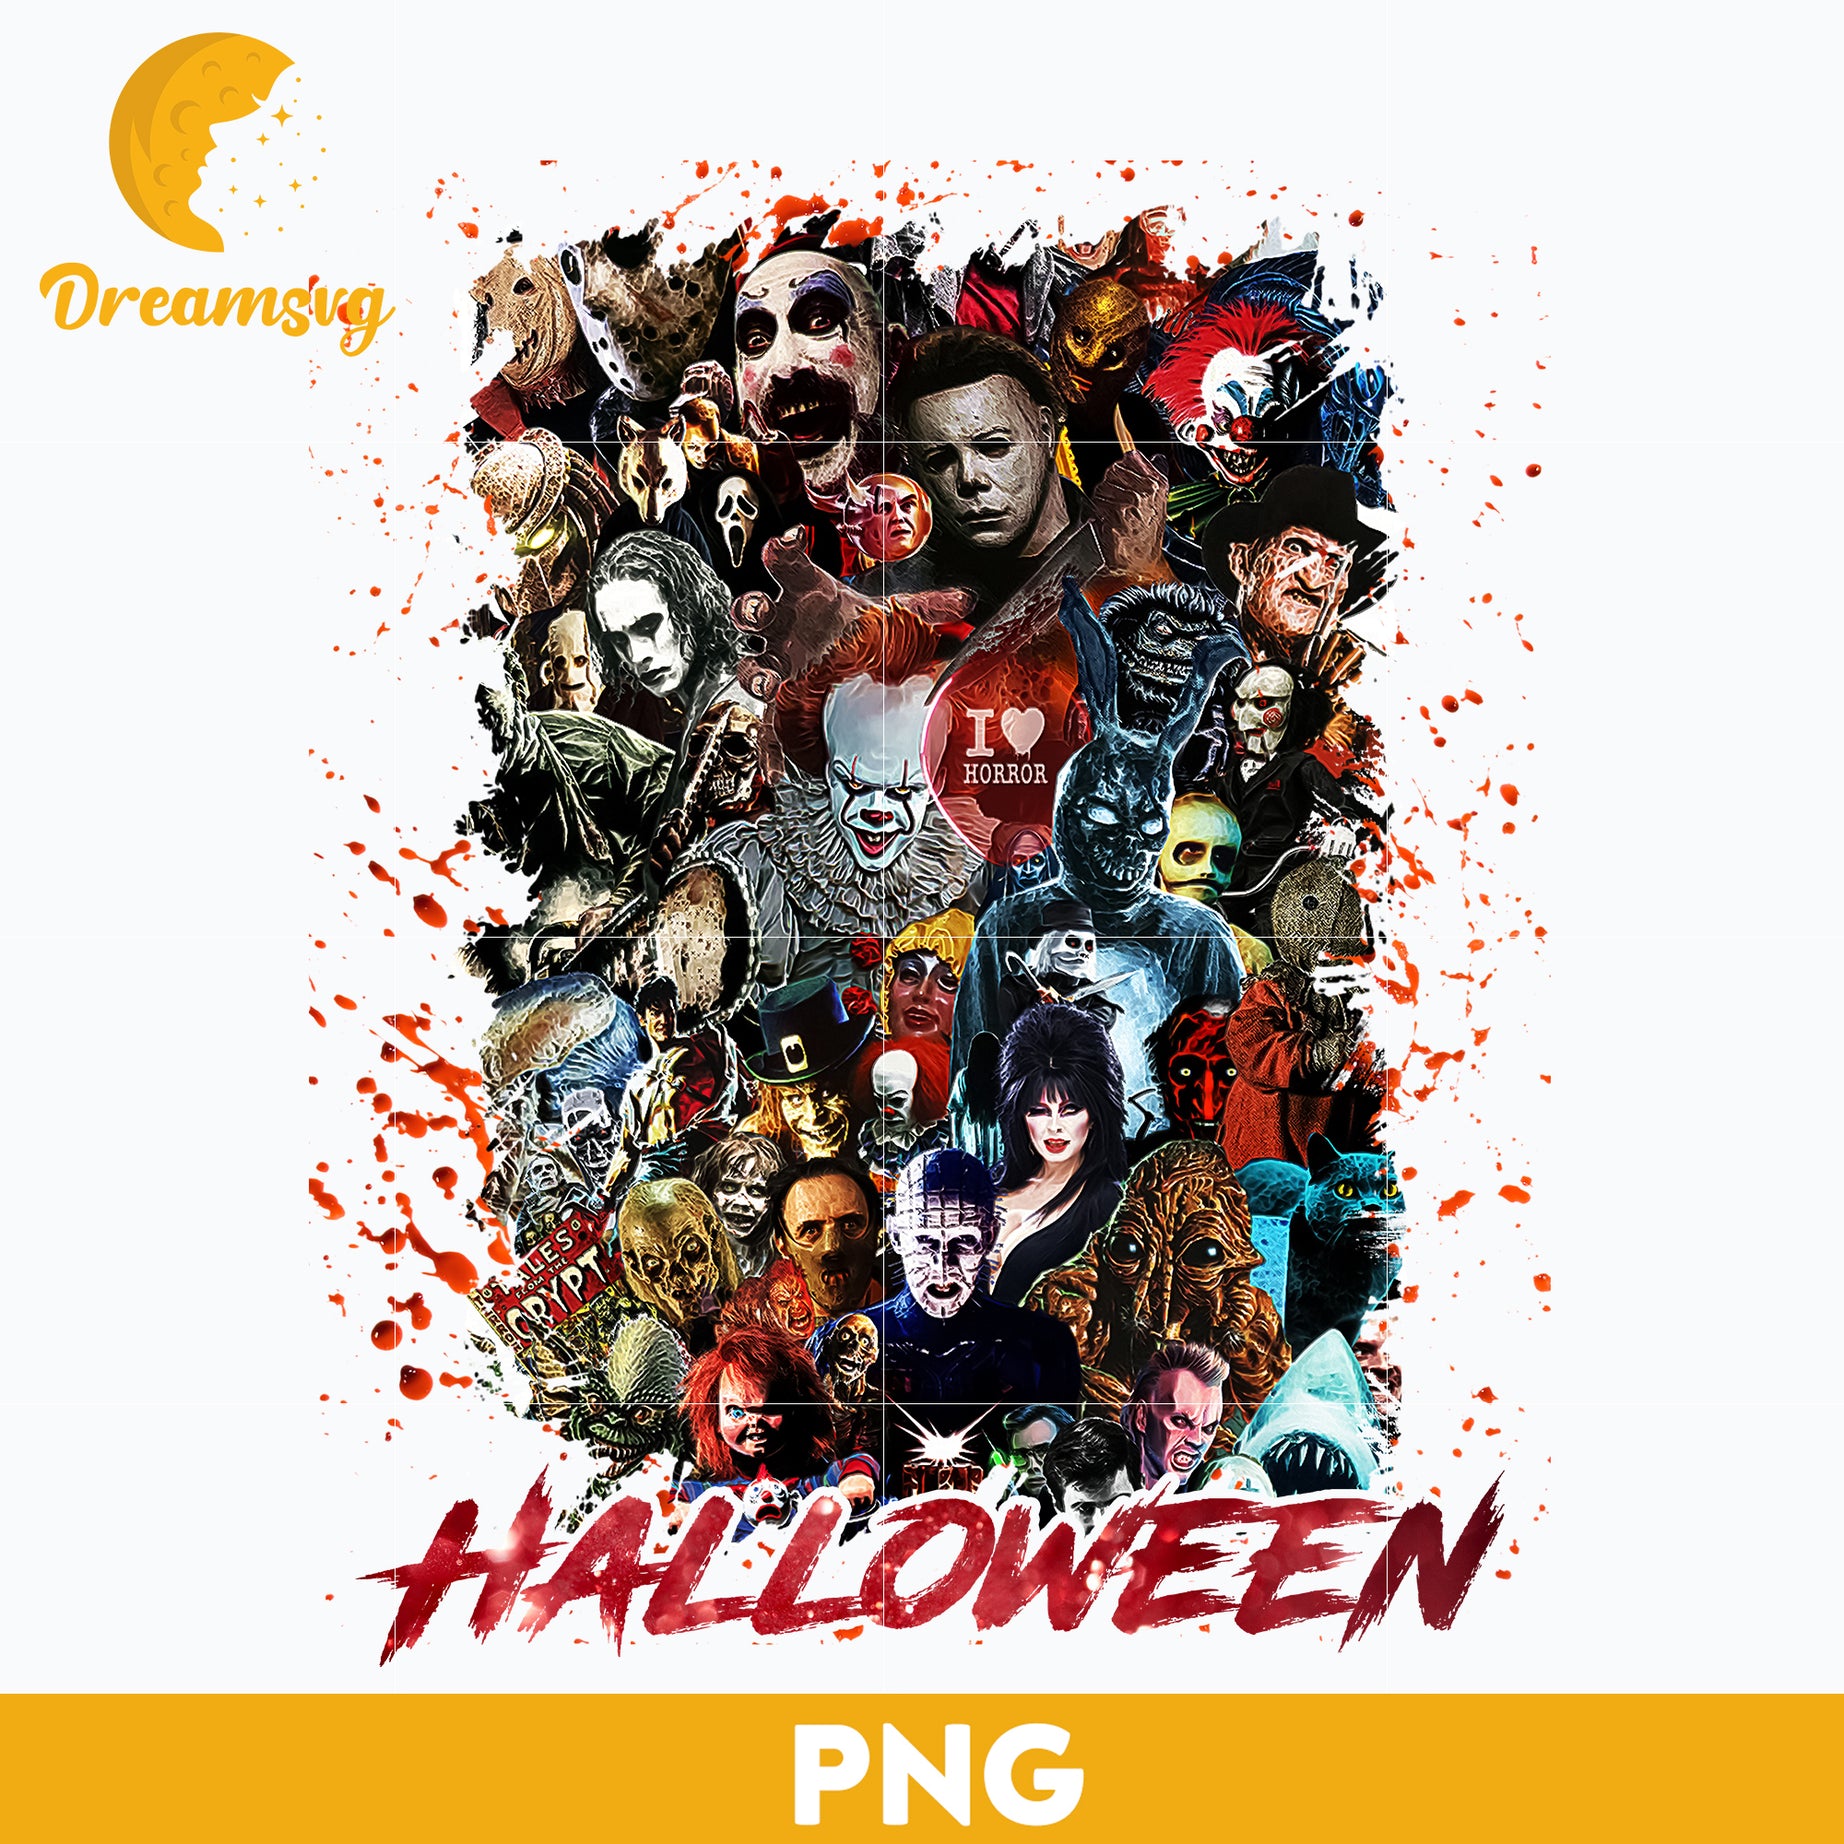 Horror movies PNG, Horror Characters PNG, Halloween Horror Movie Killers, Horror Movie Killers PNG, Digital files